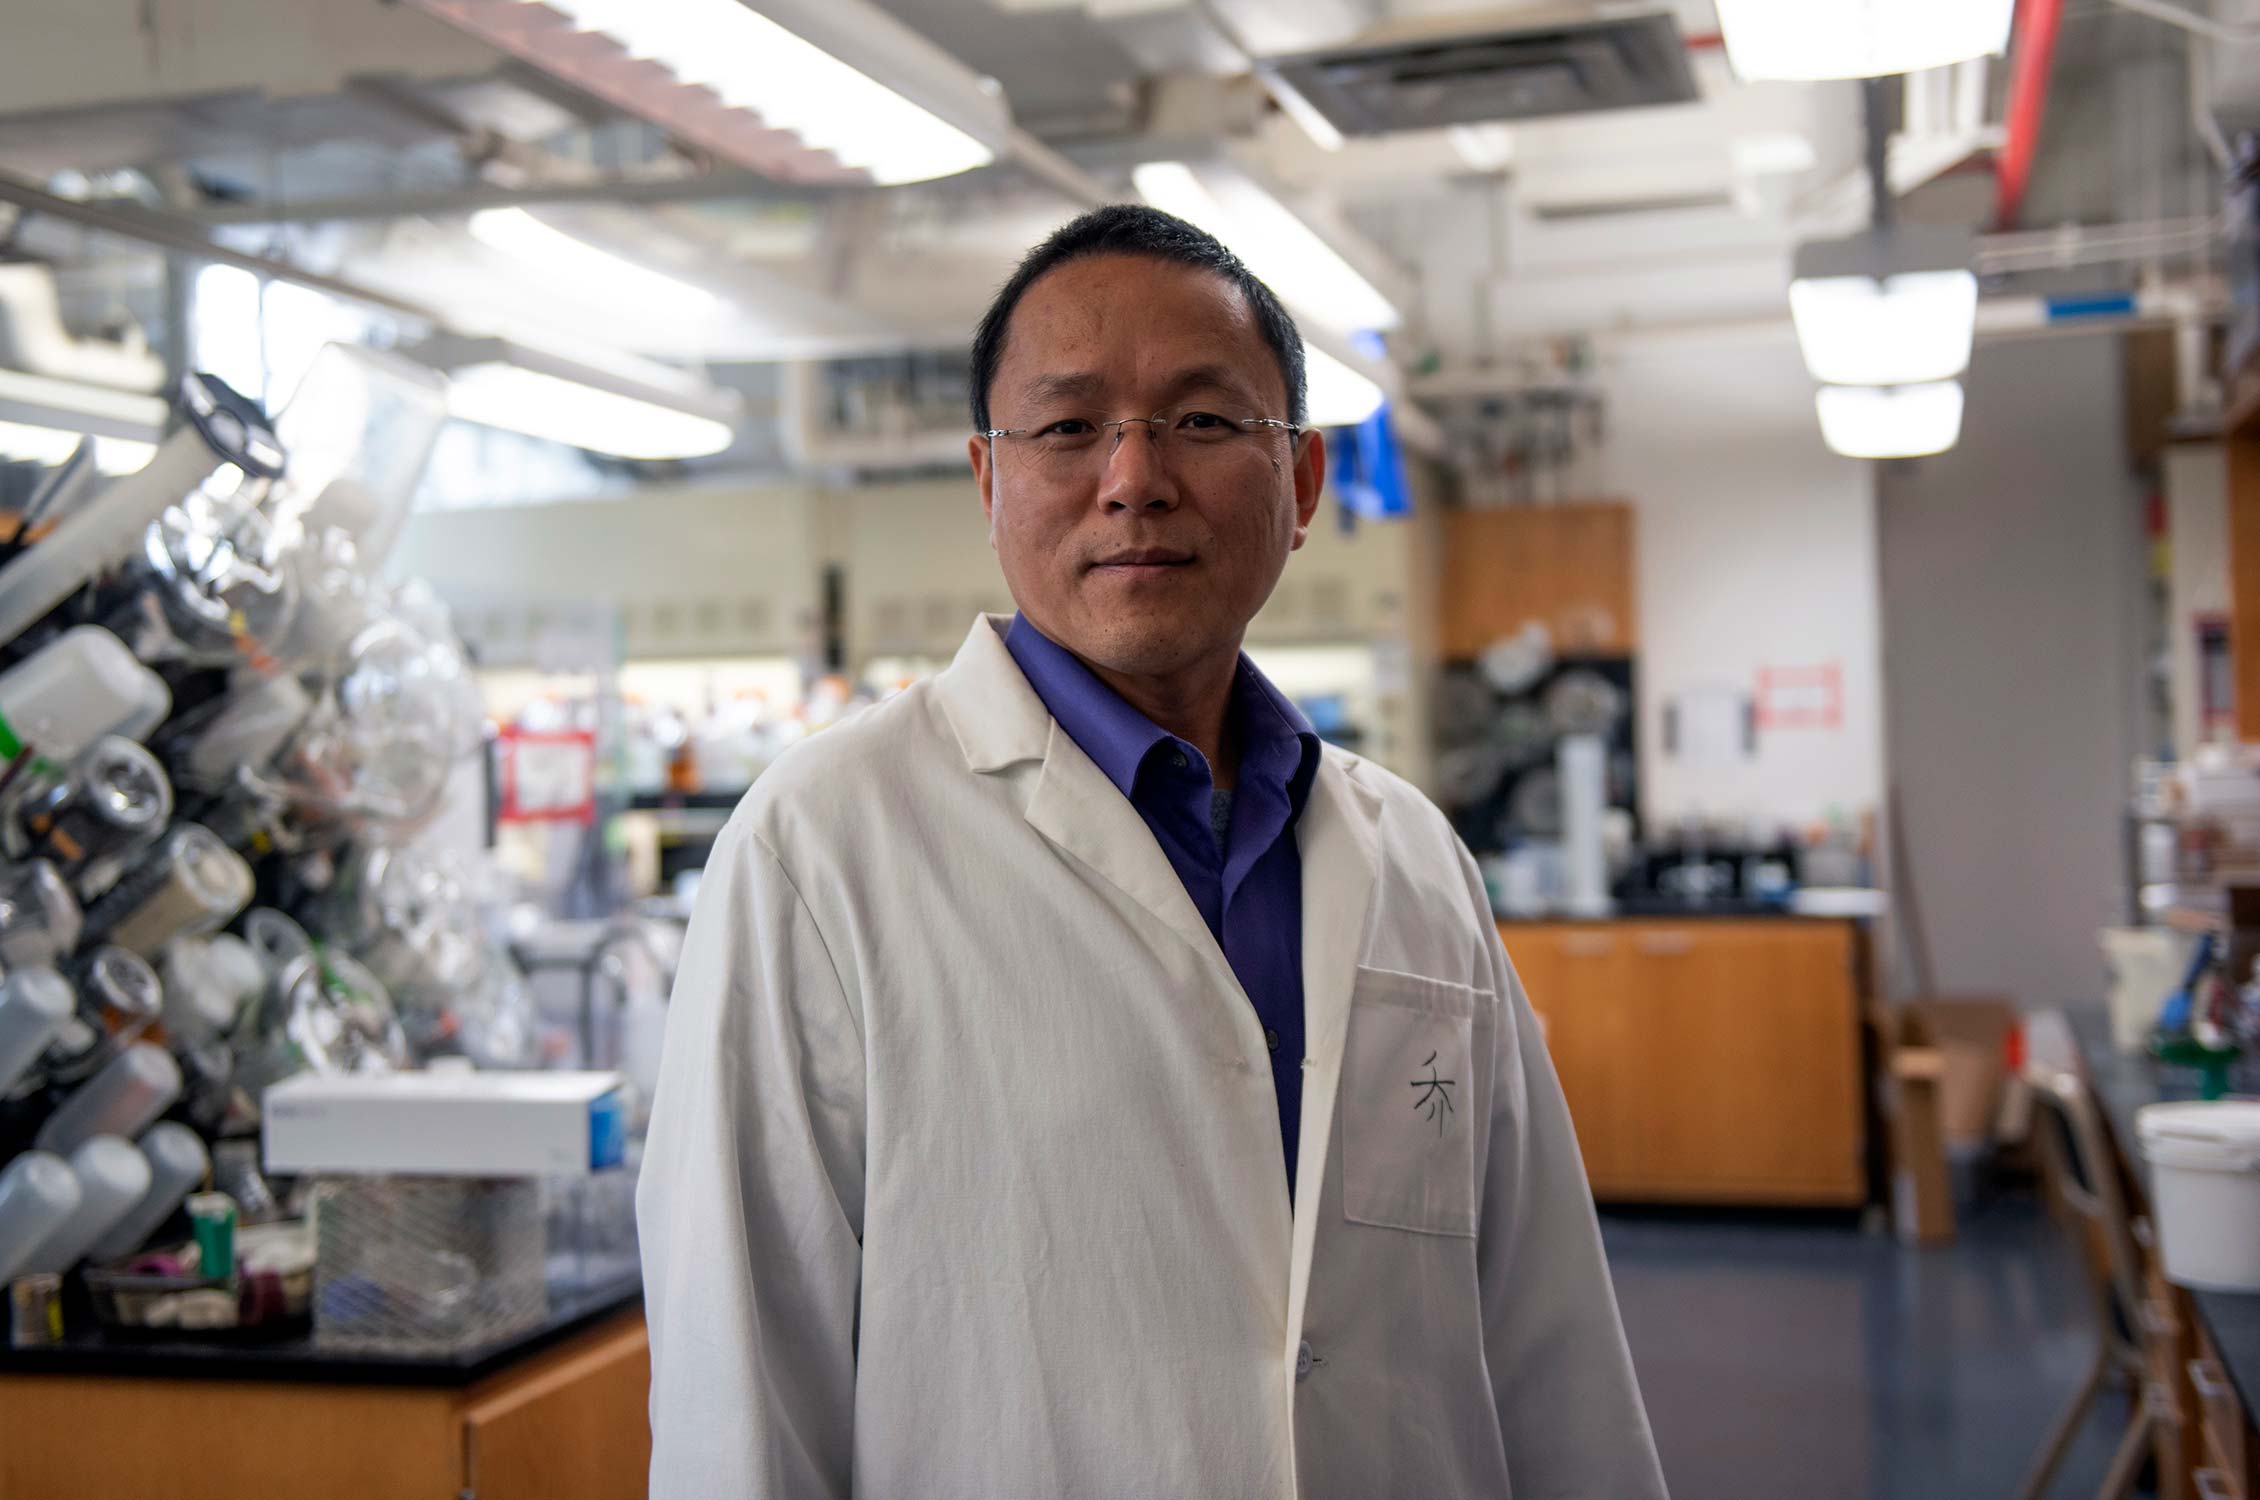 Texas A&amp;M chemist Wenshe Ray Liu smiles at the camera in his lab